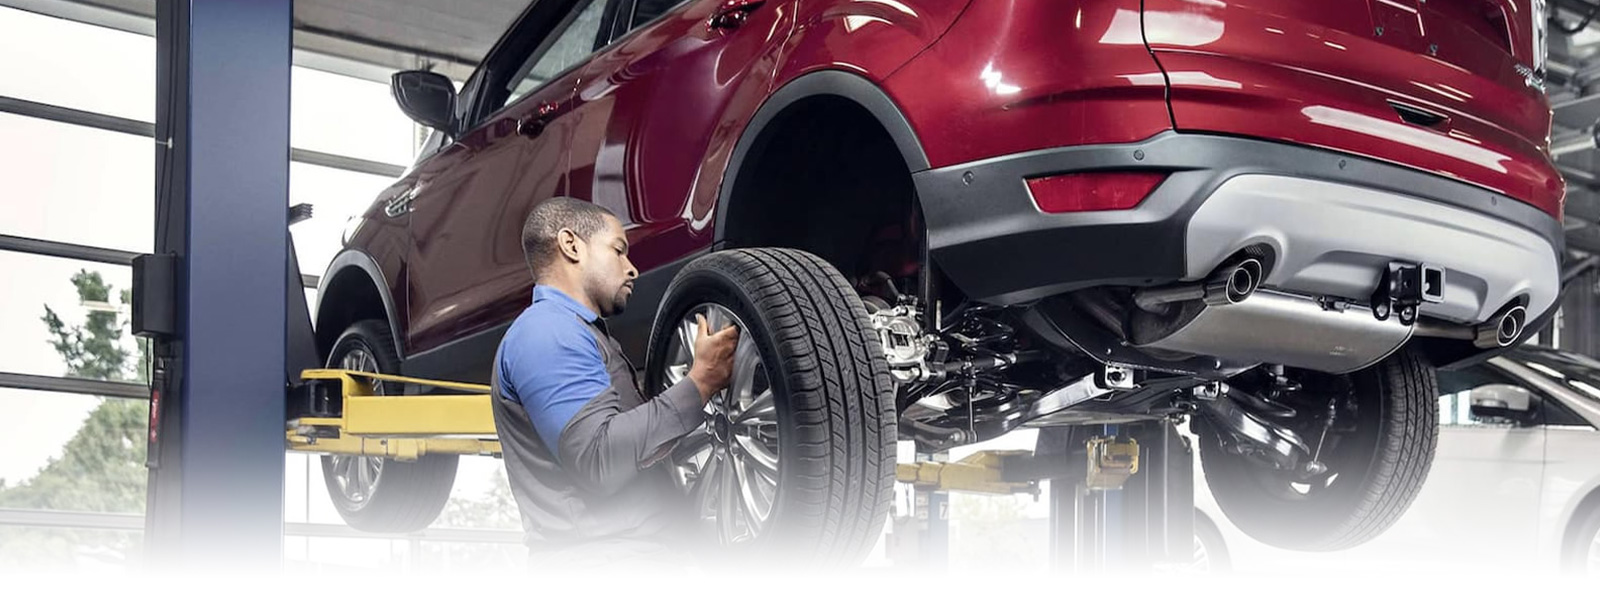 Whether your vehicle needs routine maintenance or major repairs, don't hesitate to visit One Stop Auto Shop.